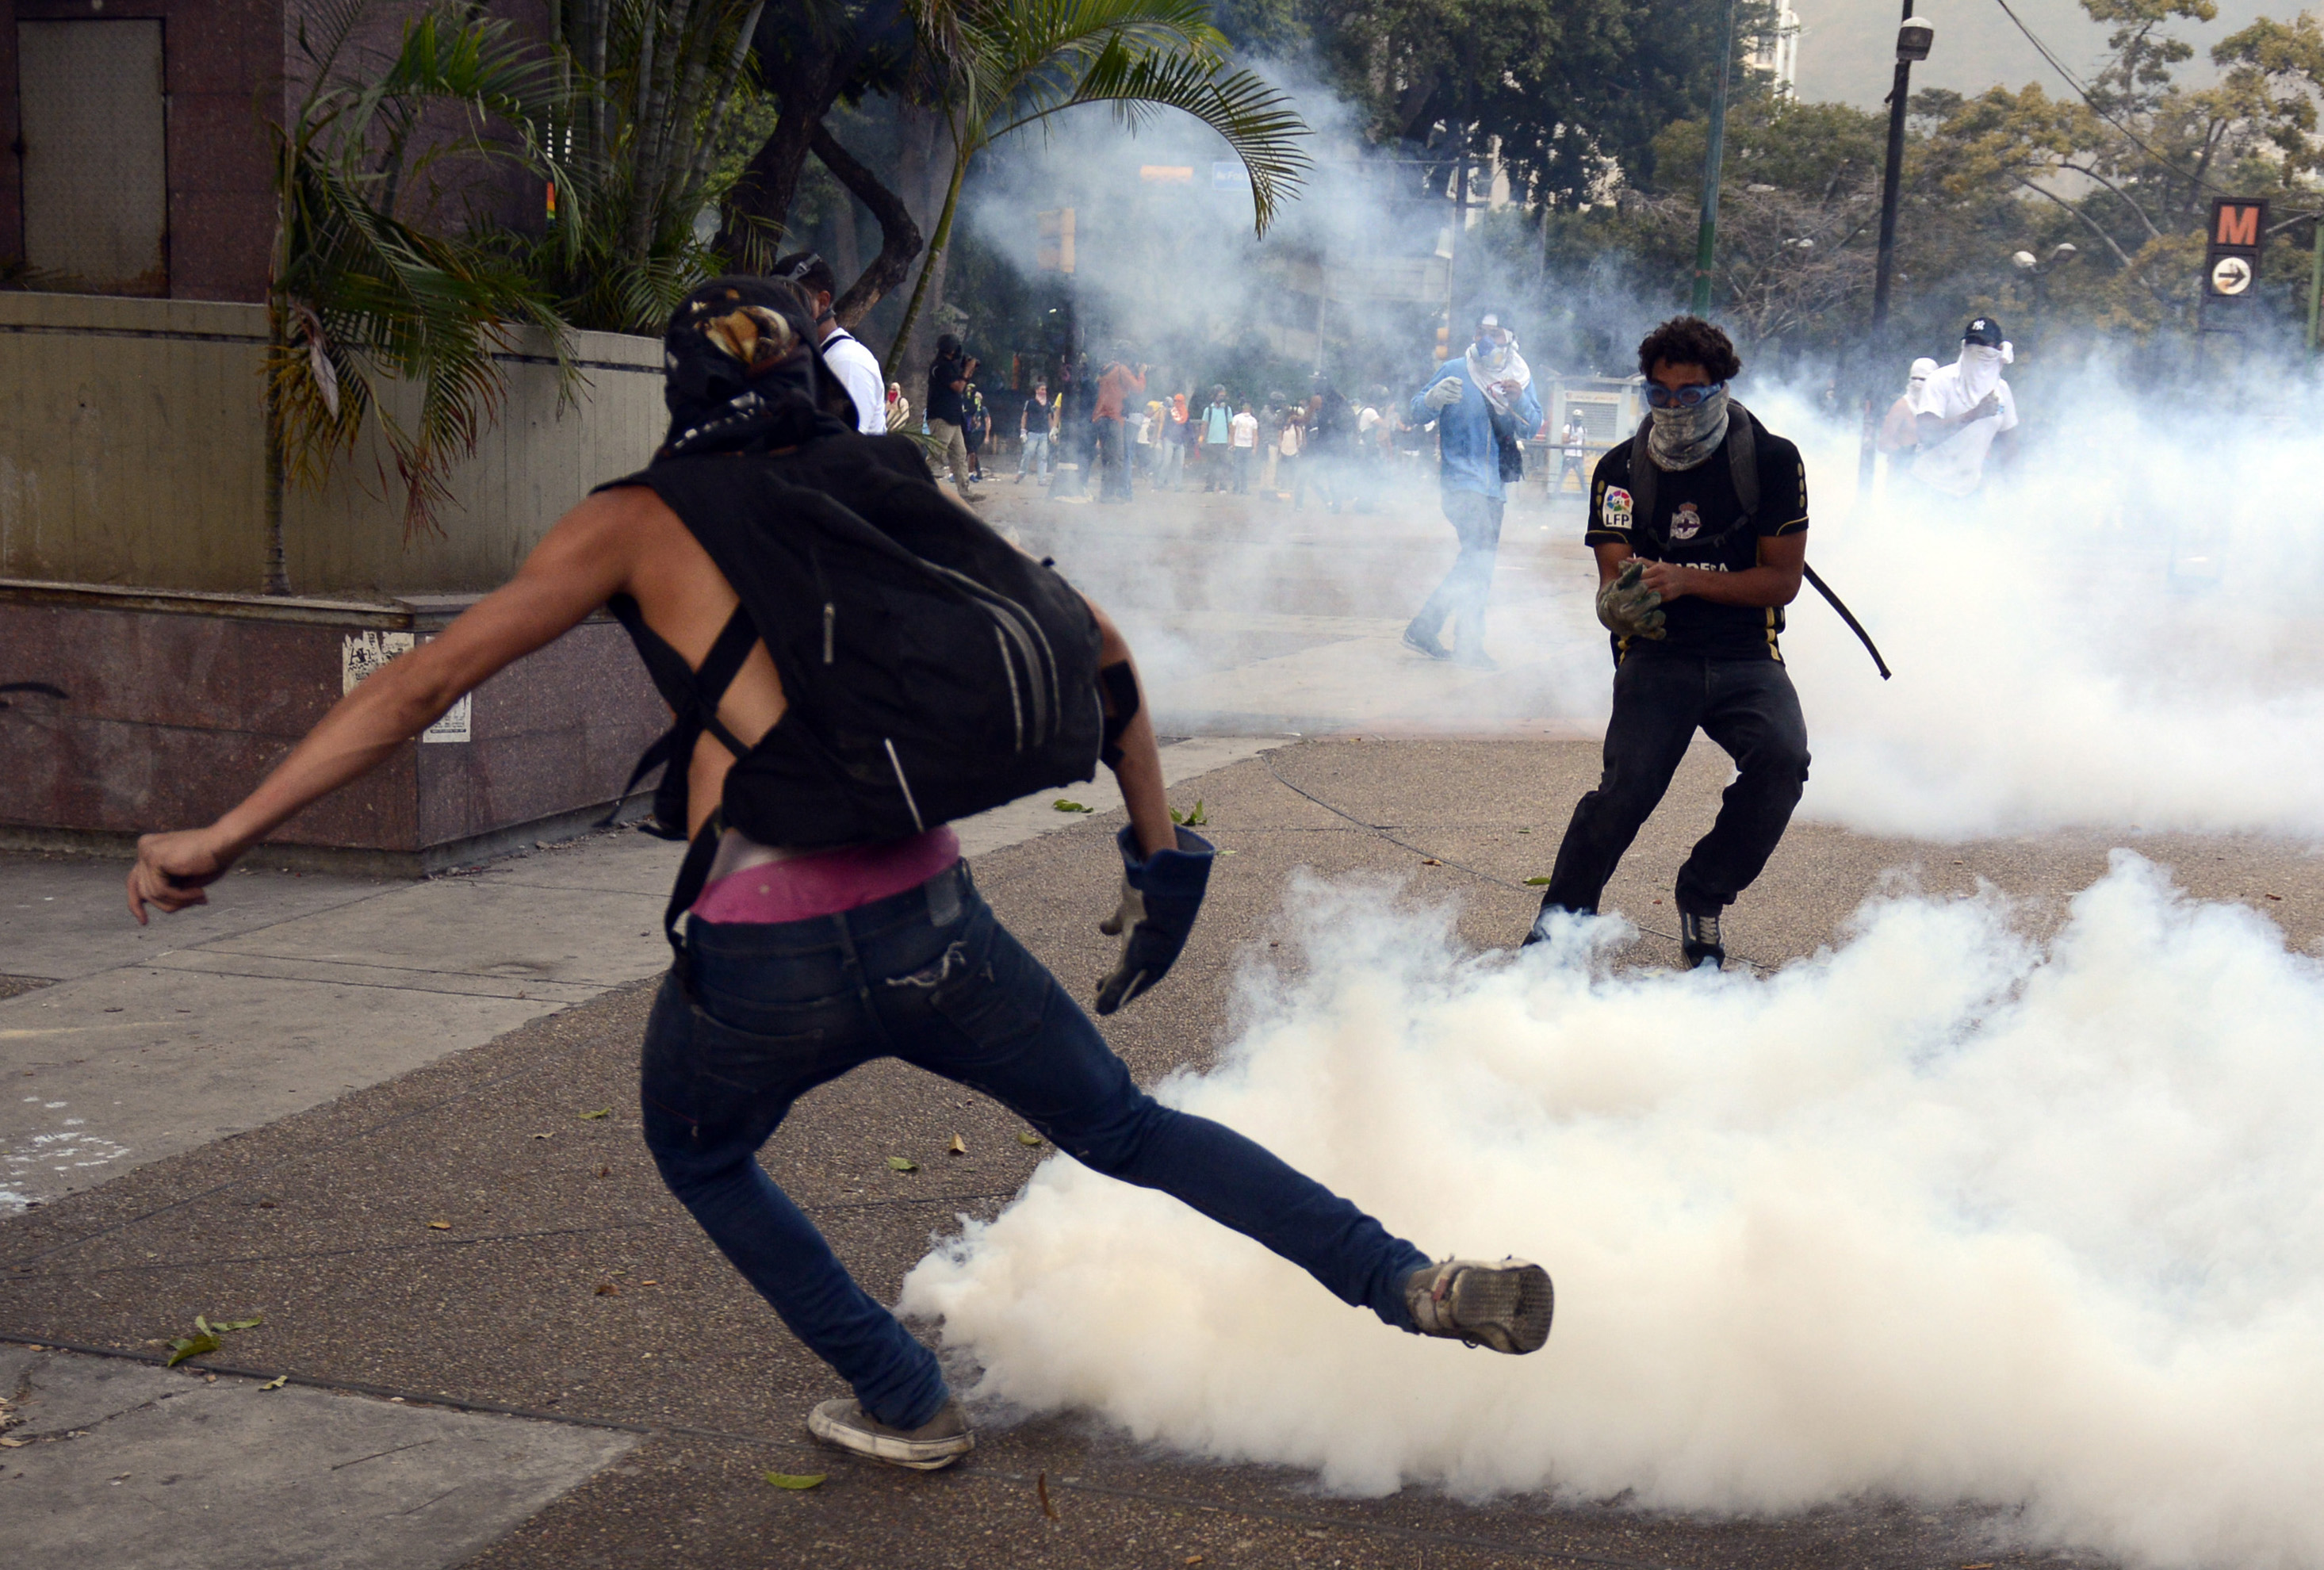 Opposition activists returns tear gas to riot police during a protest against the government of Venezuelan President Nicolas Maduro in Caracas on March 6, 2014. A member of the National Guard